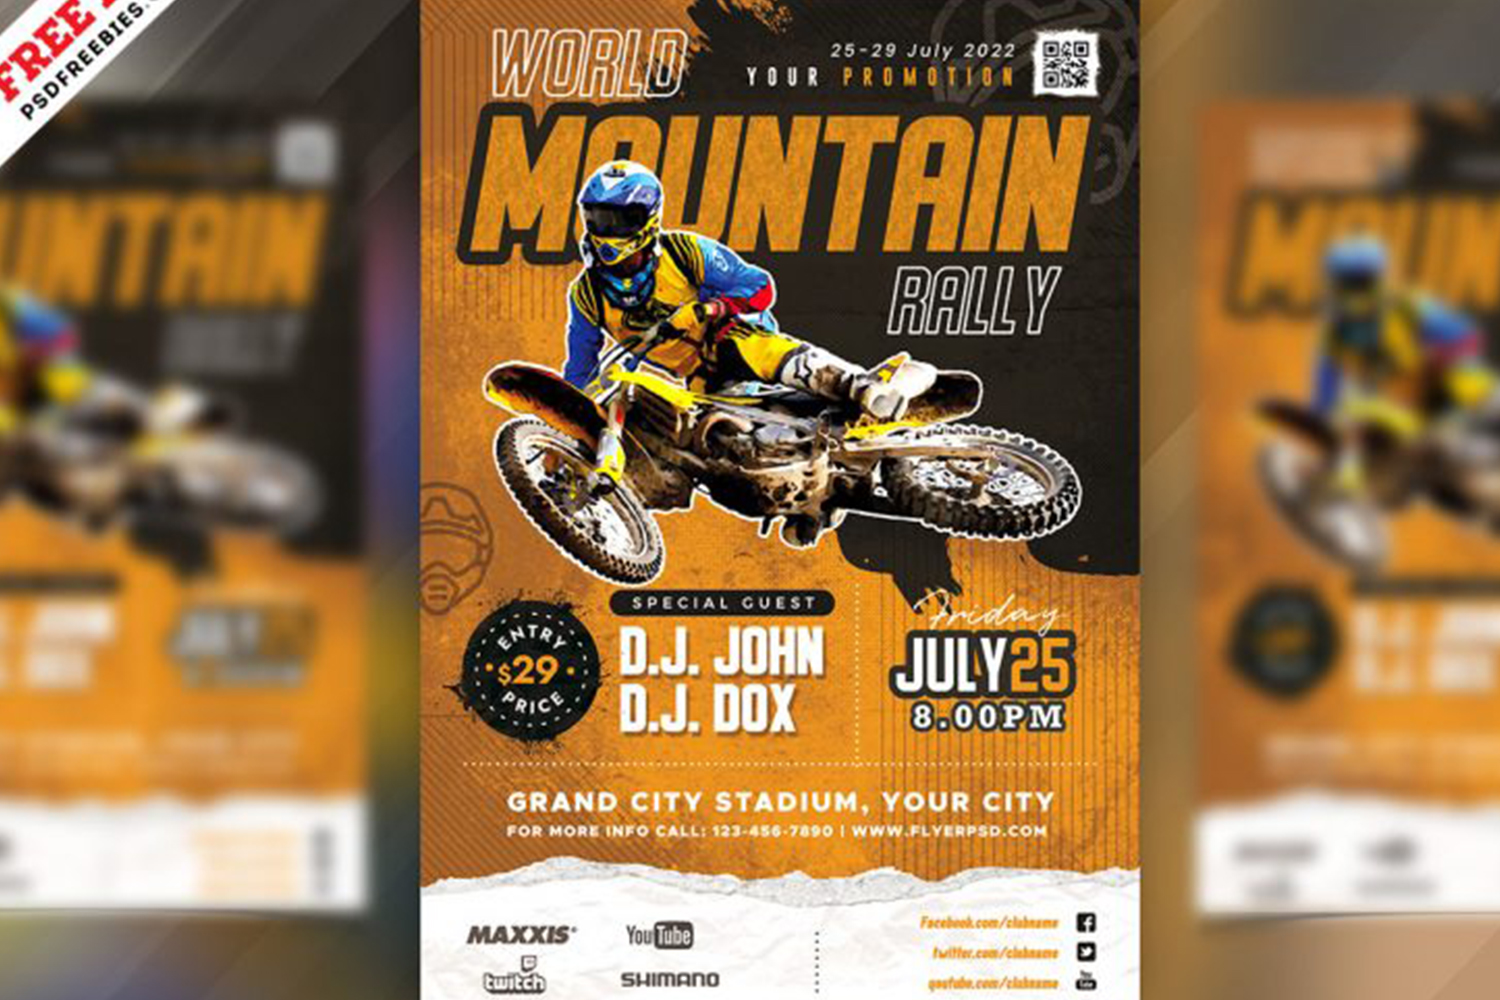 Racing Event Flyer PSD Free Download